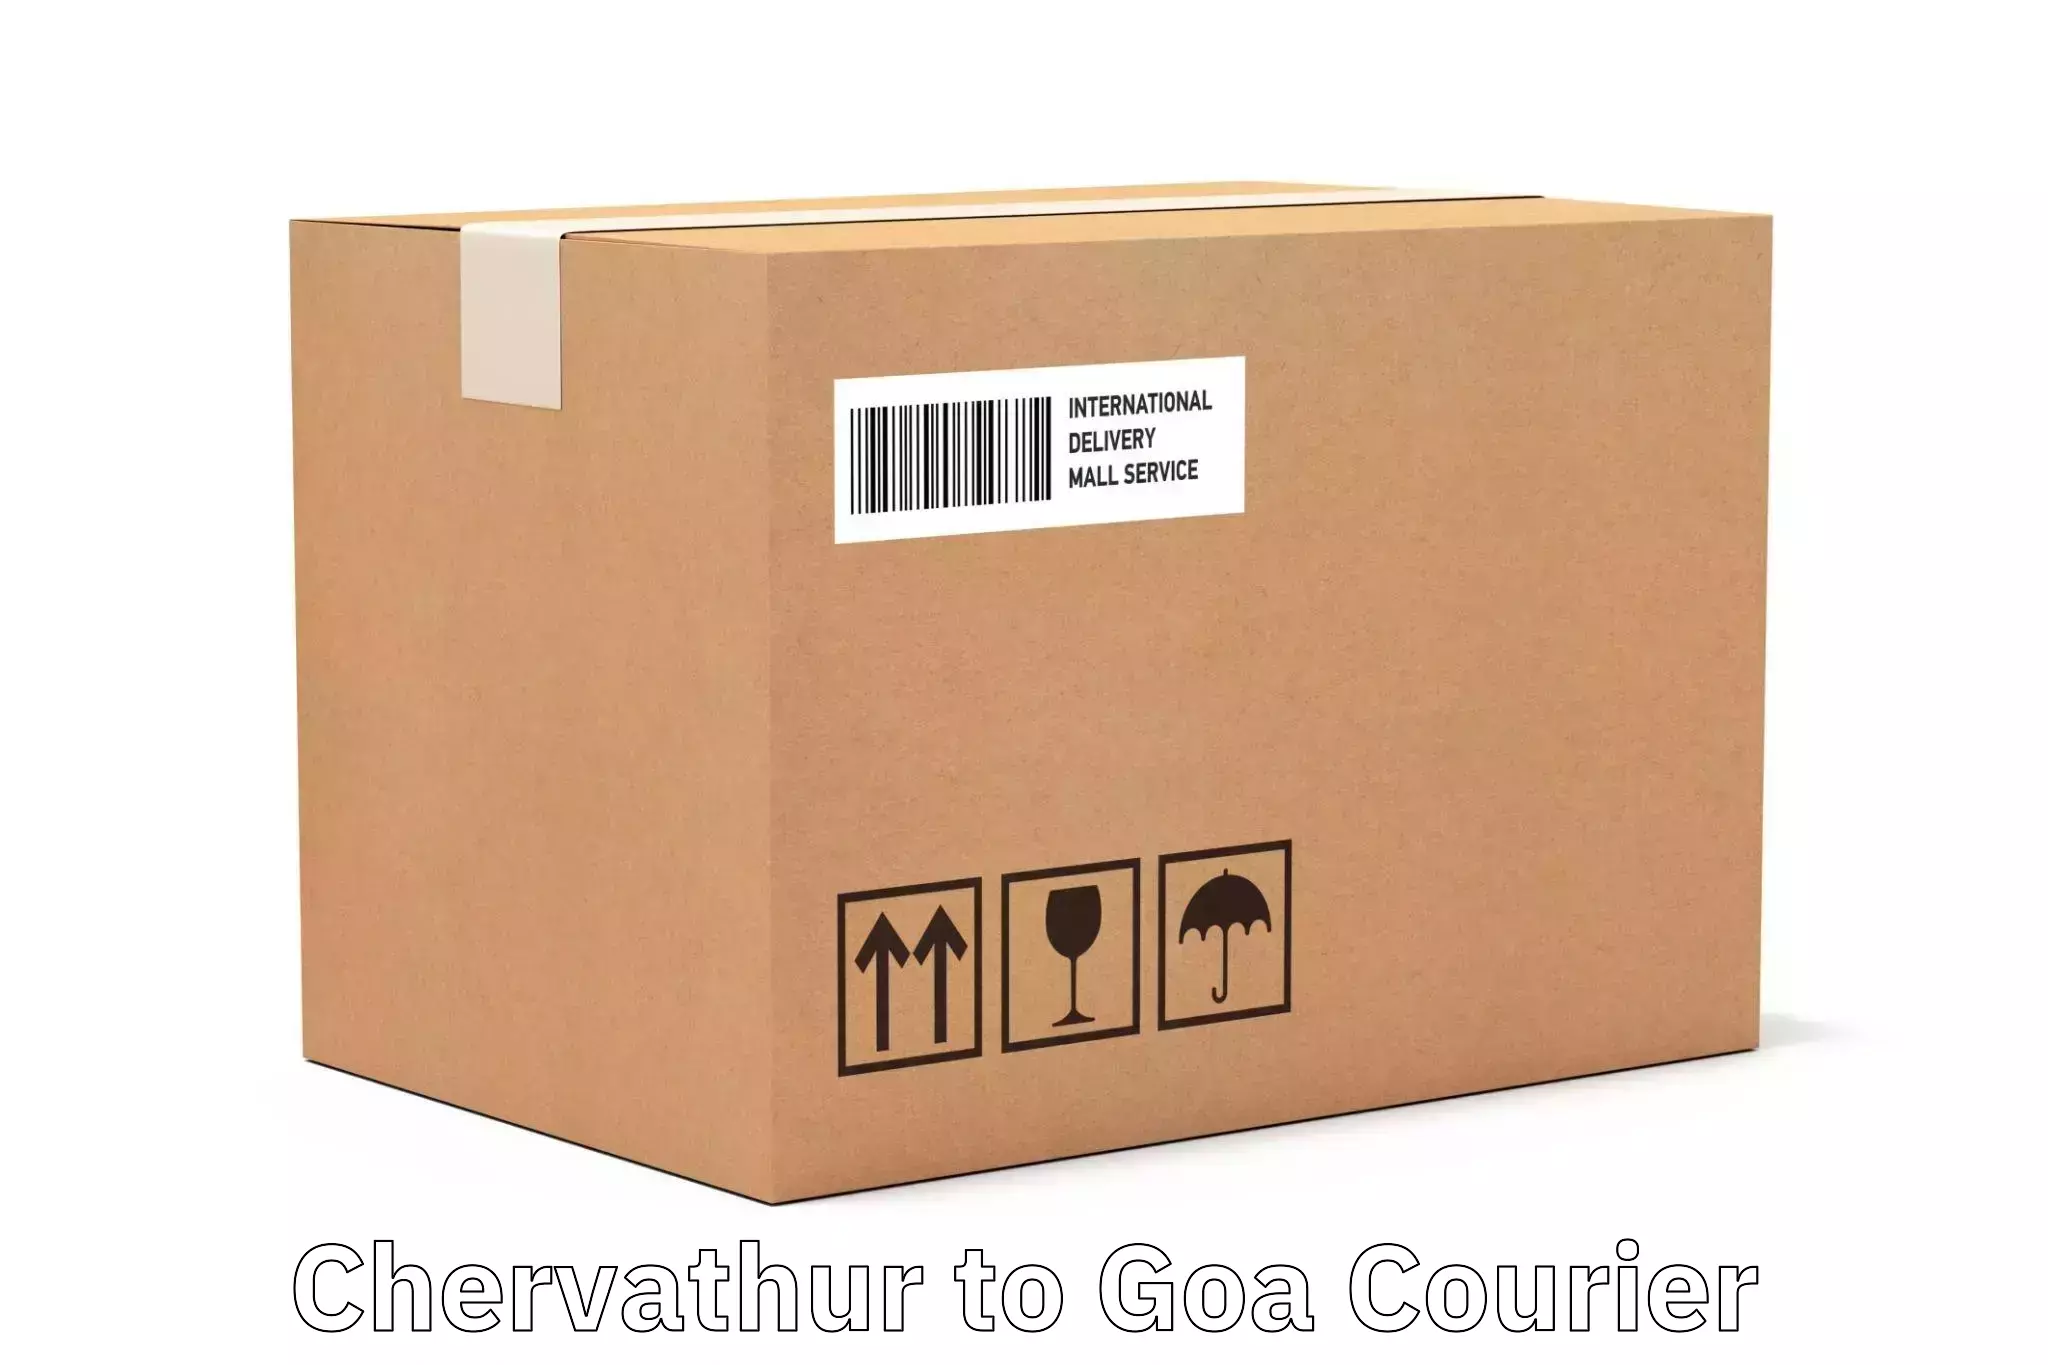 Global courier networks Chervathur to South Goa